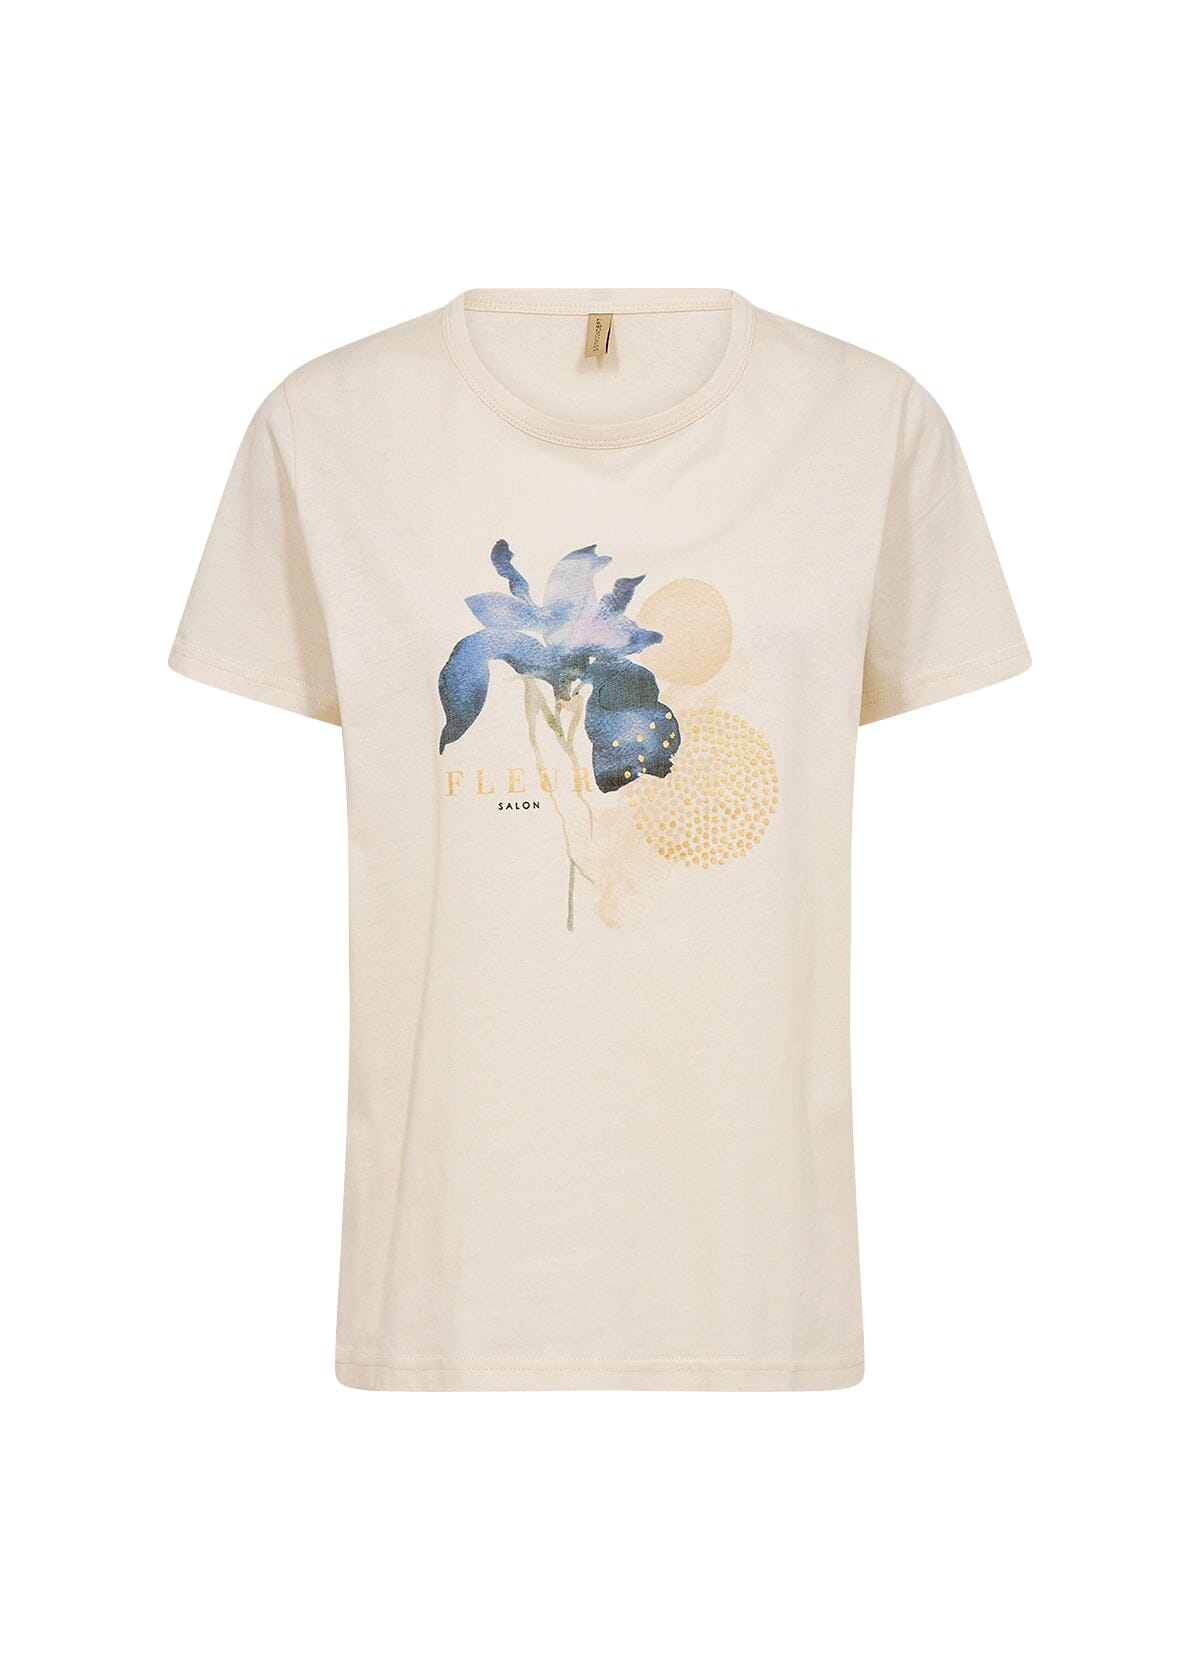 Derby T-Shirt in Crystal Blue T-Shirt Soyaconcept 